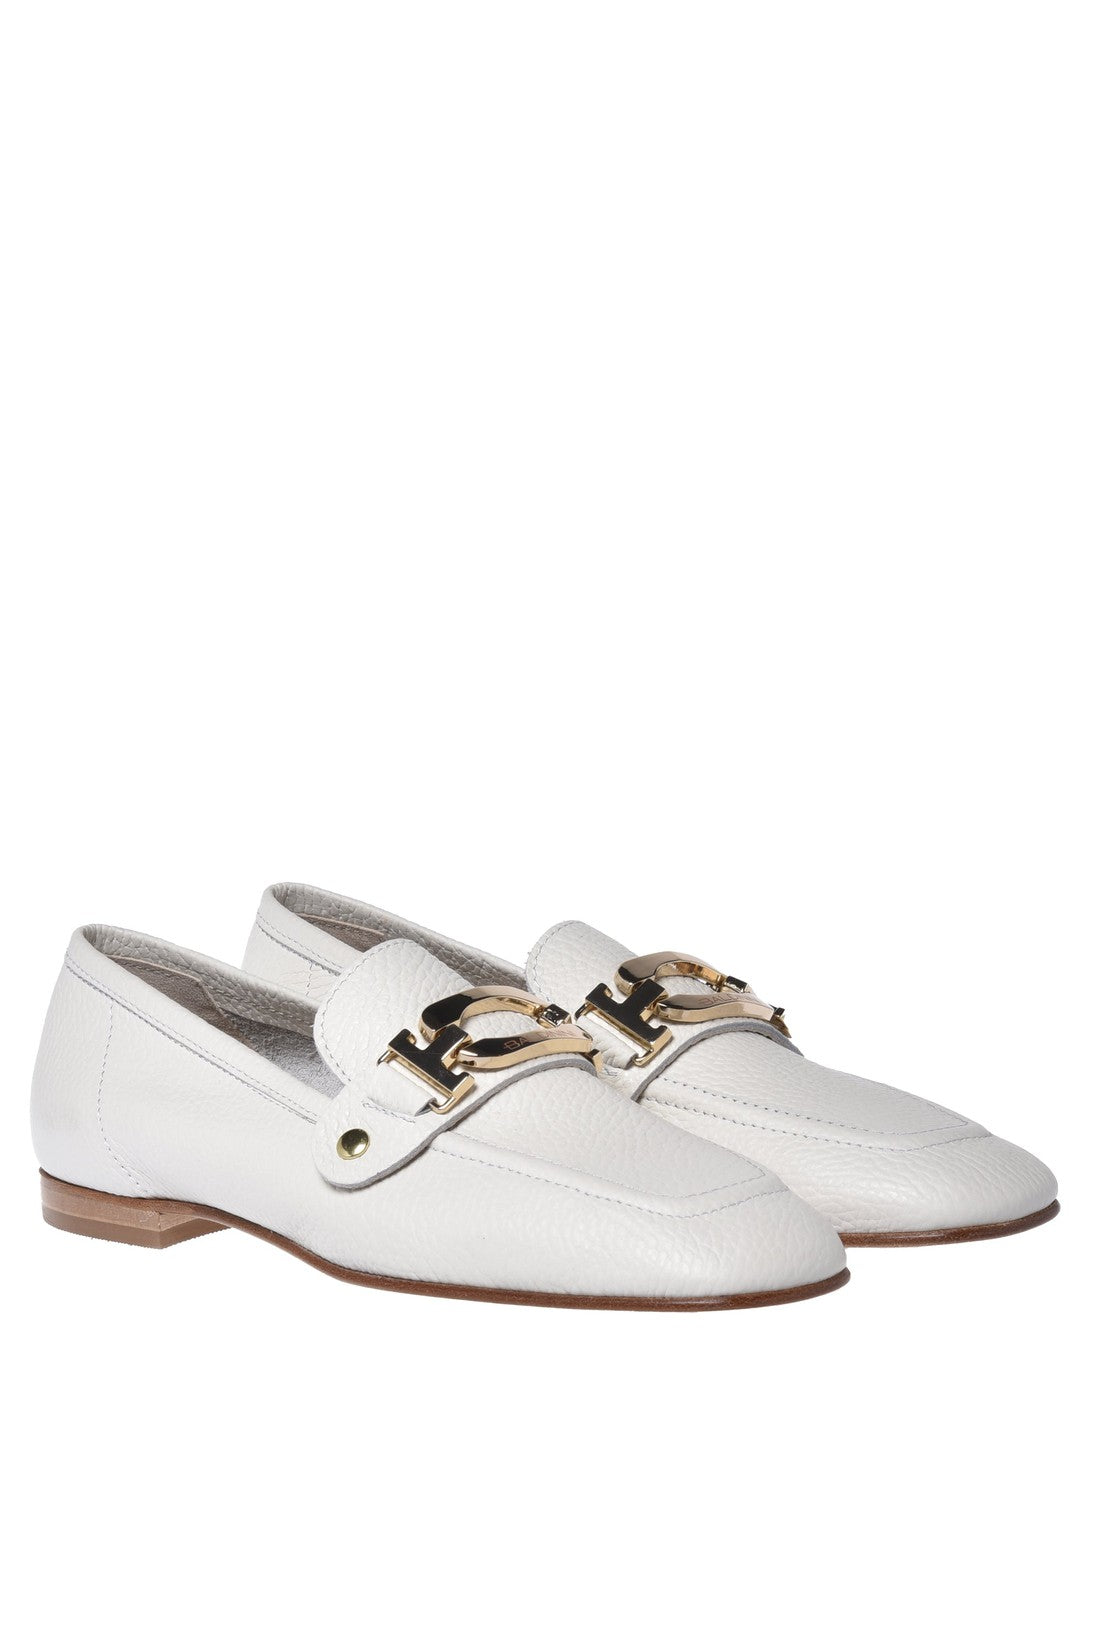 Loafer in cream tumbled leather